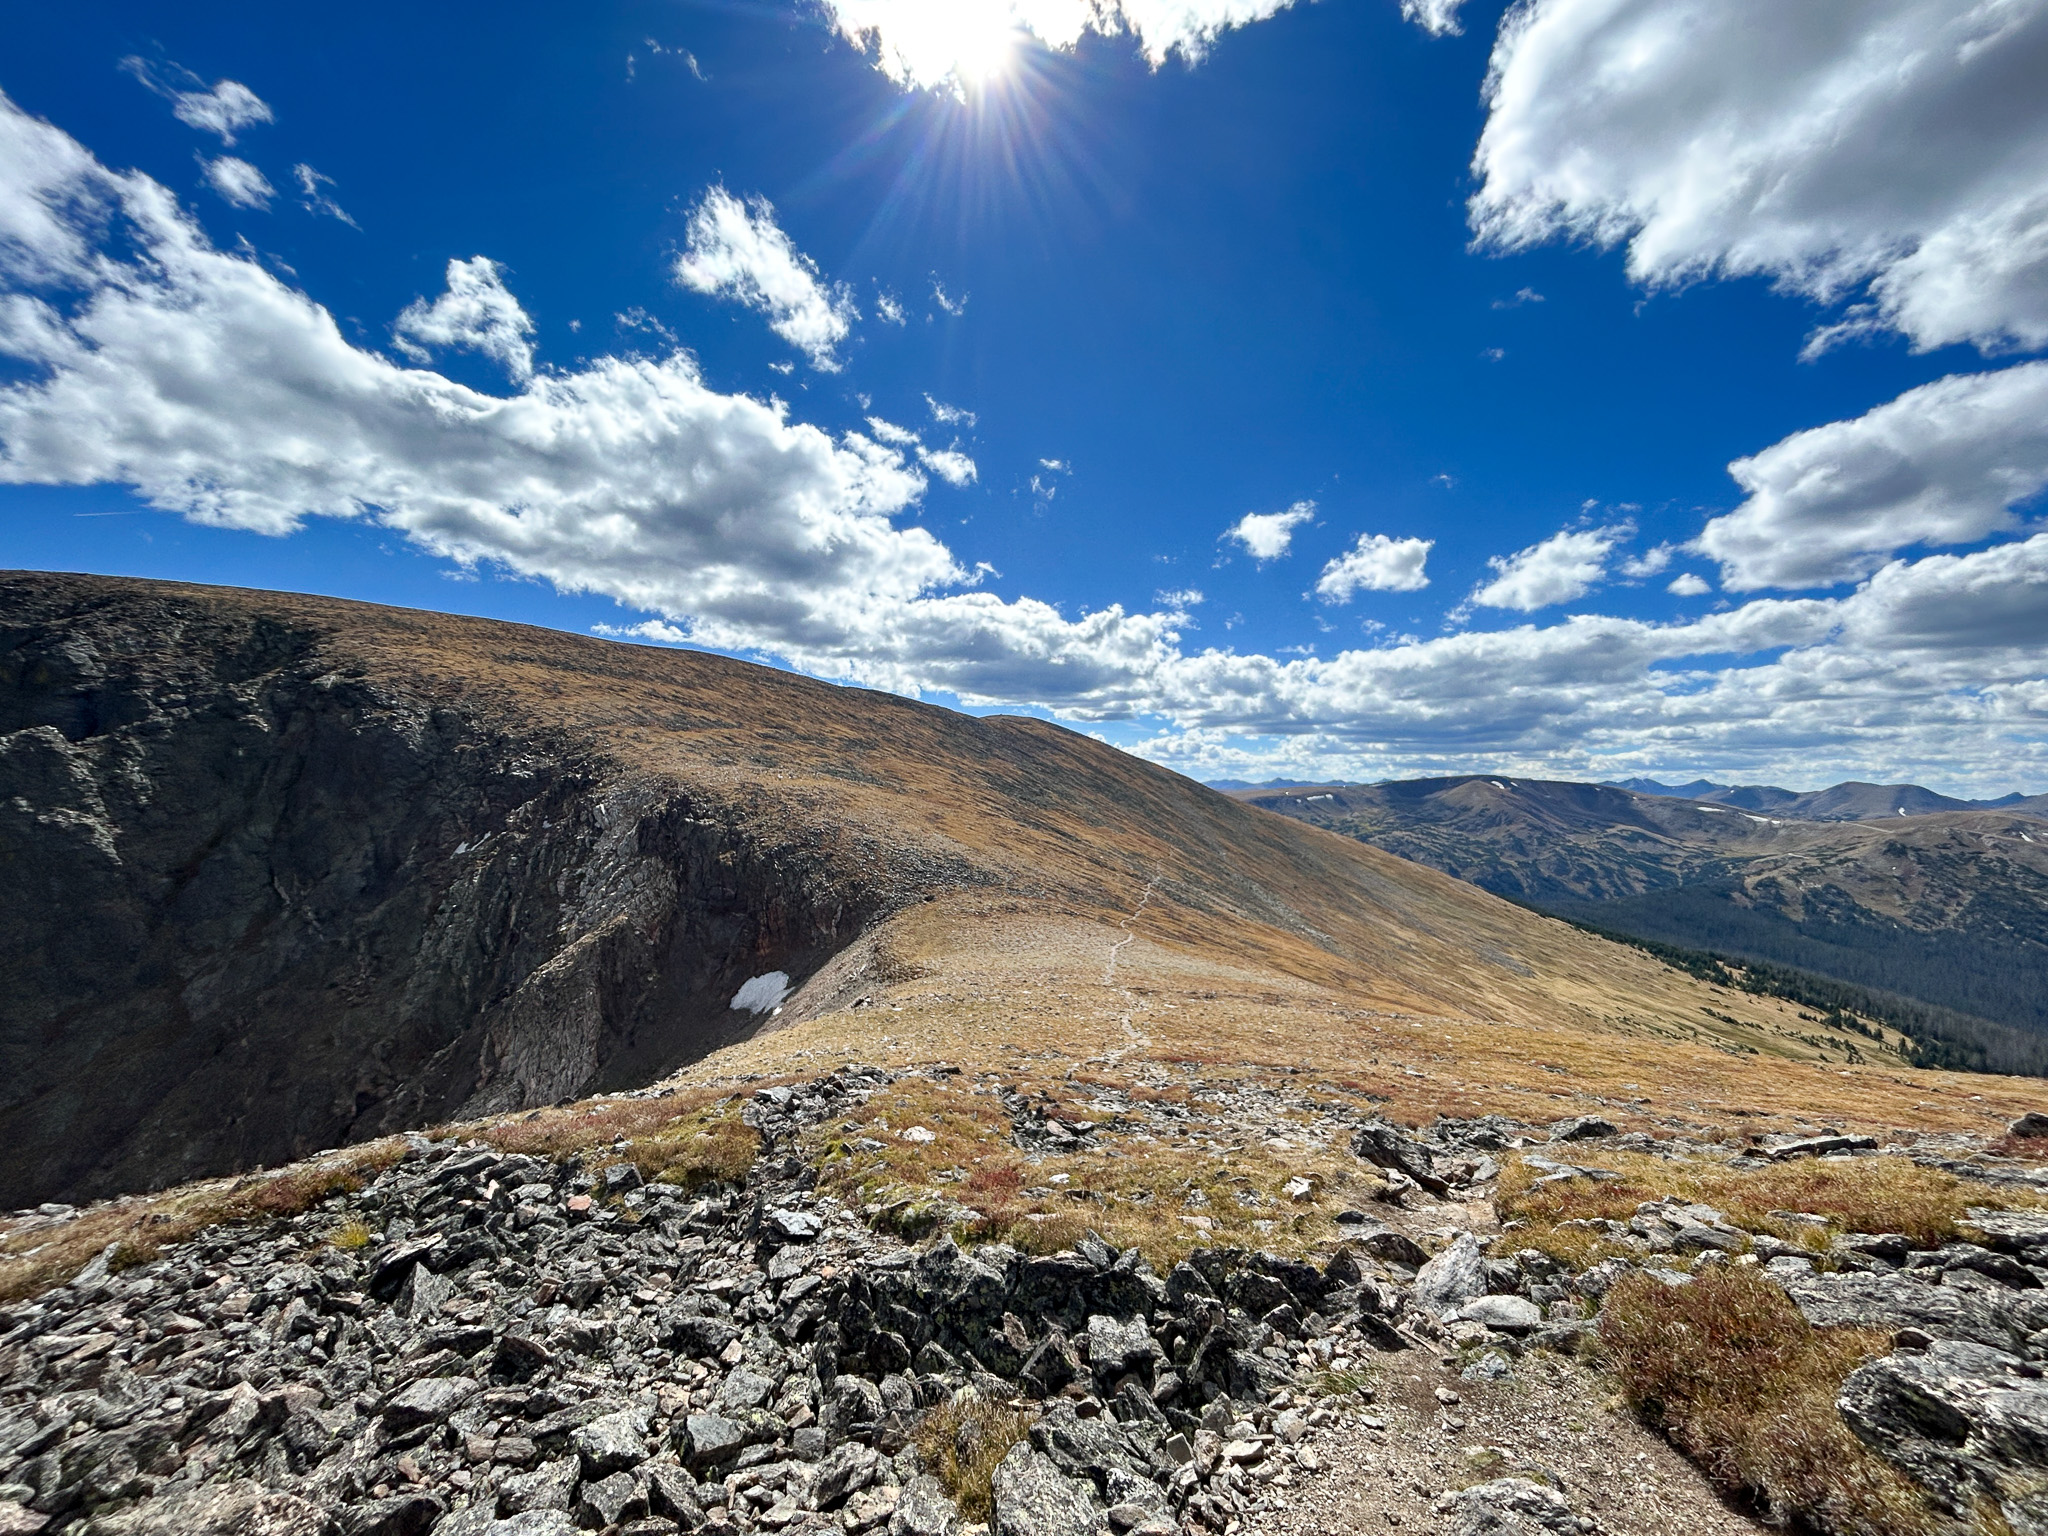 A scenic mountain landscape in Rocky Mountain National Park under a vast blue sky dotted with fluffy white clouds. The sun is visible on the upper right corner, casting a bright glare. A rugged mountain slope occupies the foreground, consisting mostly of rocky terrain with sparse vegetation, leading up to a ridge line that meets the sky. In the middle distance, the mountains continue to roll with varying shades of brown and hints of green, indicating sparse grasses or low bushes. In the far distance, a series of mountain ranges extend to the horizon, suggesting a vast wilderness area. It's a clear day, and the overall feel is of open space and natural beauty typical of a high-altitude environment.